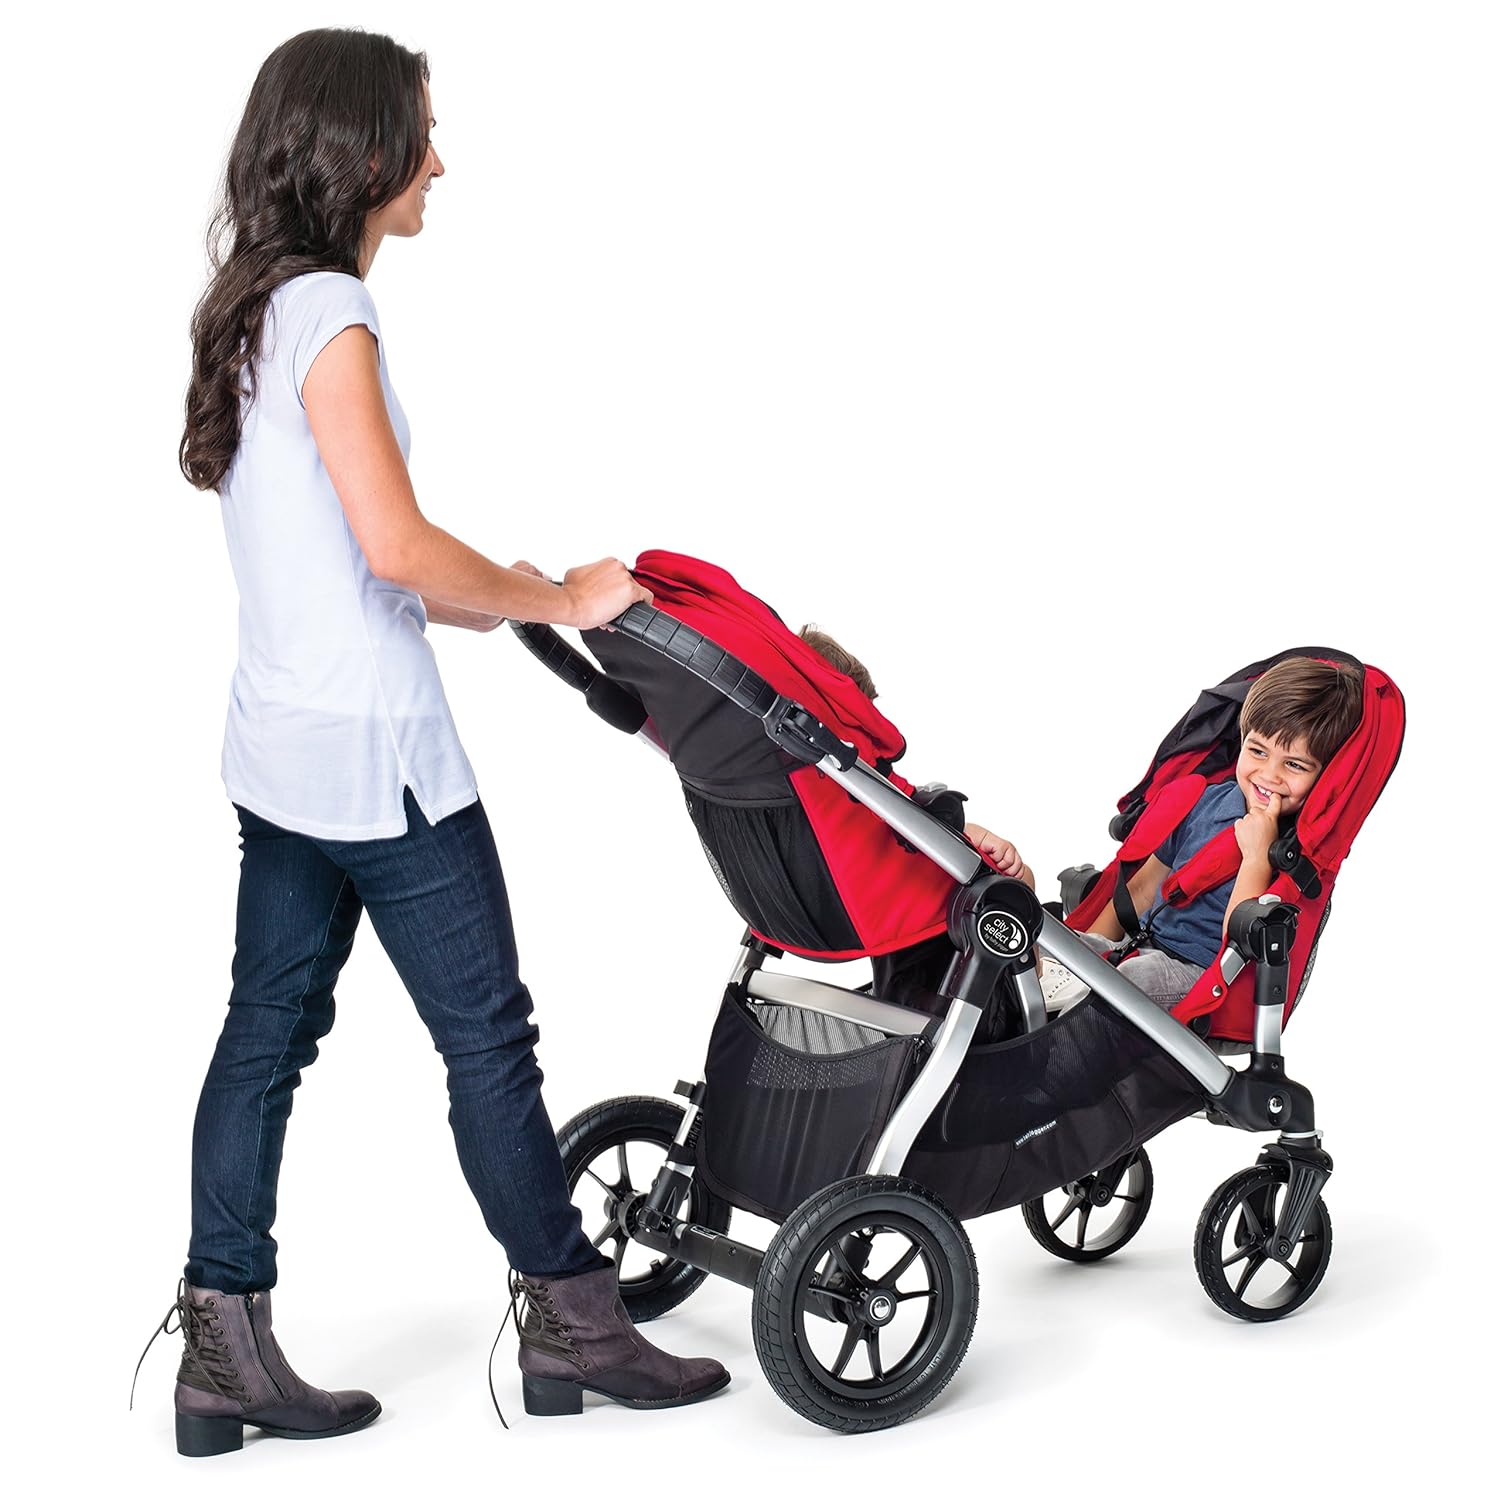 Baby Jogger City Select 745146034105 Second Seat Black